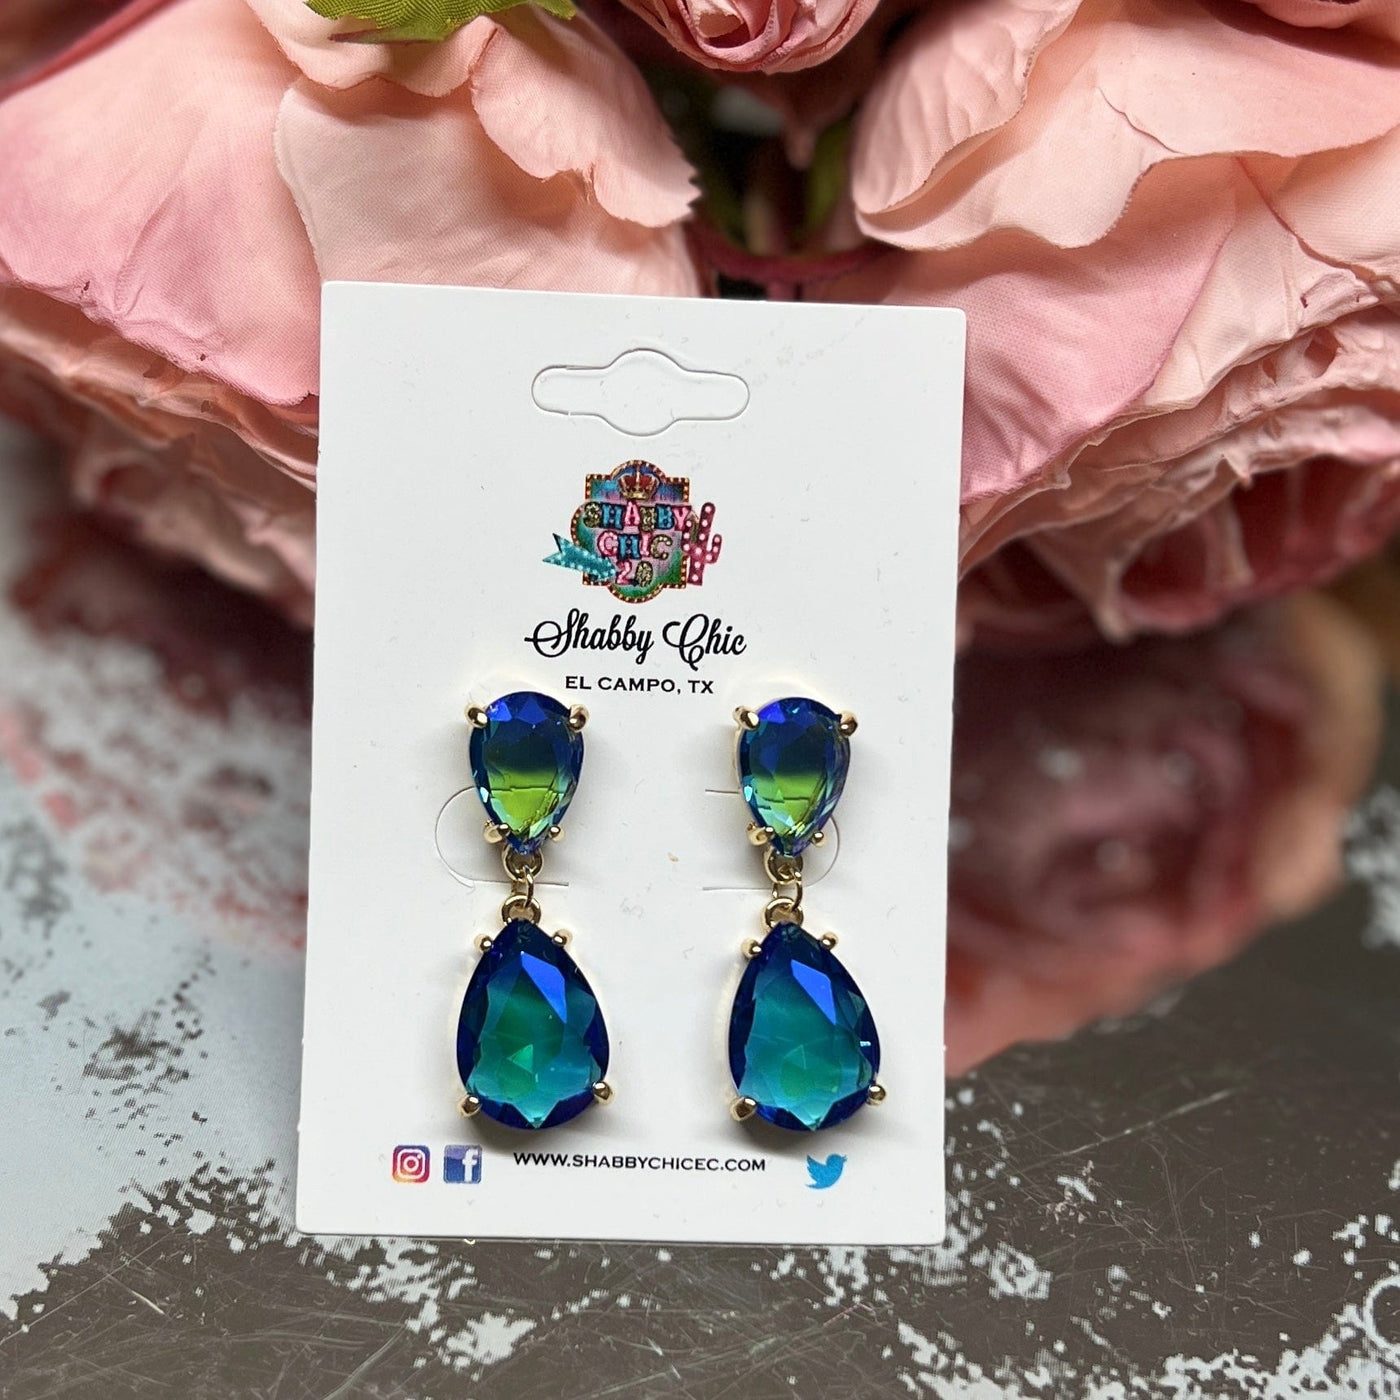 At The Ball Earrings Shabby Chic Boutique and Tanning Salon Blue